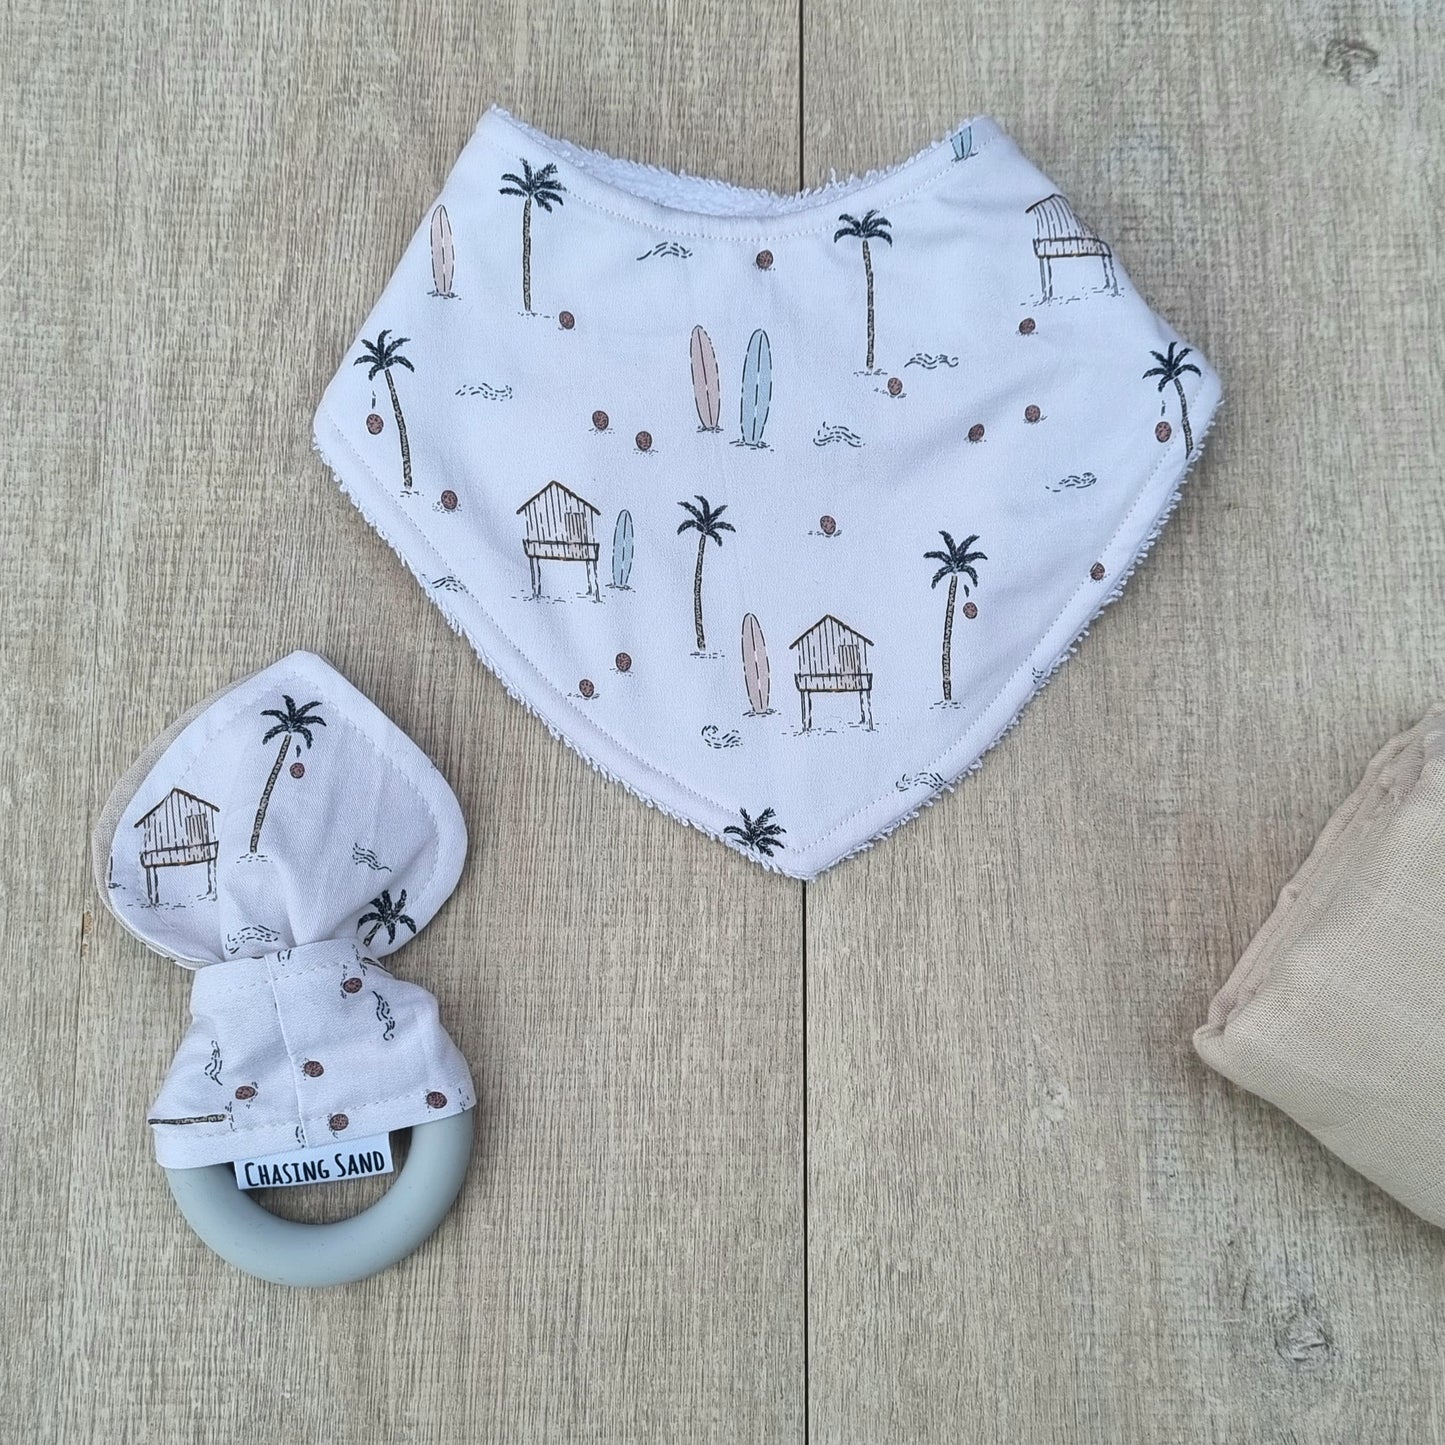 2 Piece Gift Set - Beach Life against wooden backdrop. Beach-themed illustrations on white background. Each set contains 1x Dribble Bib and 1x Teether.